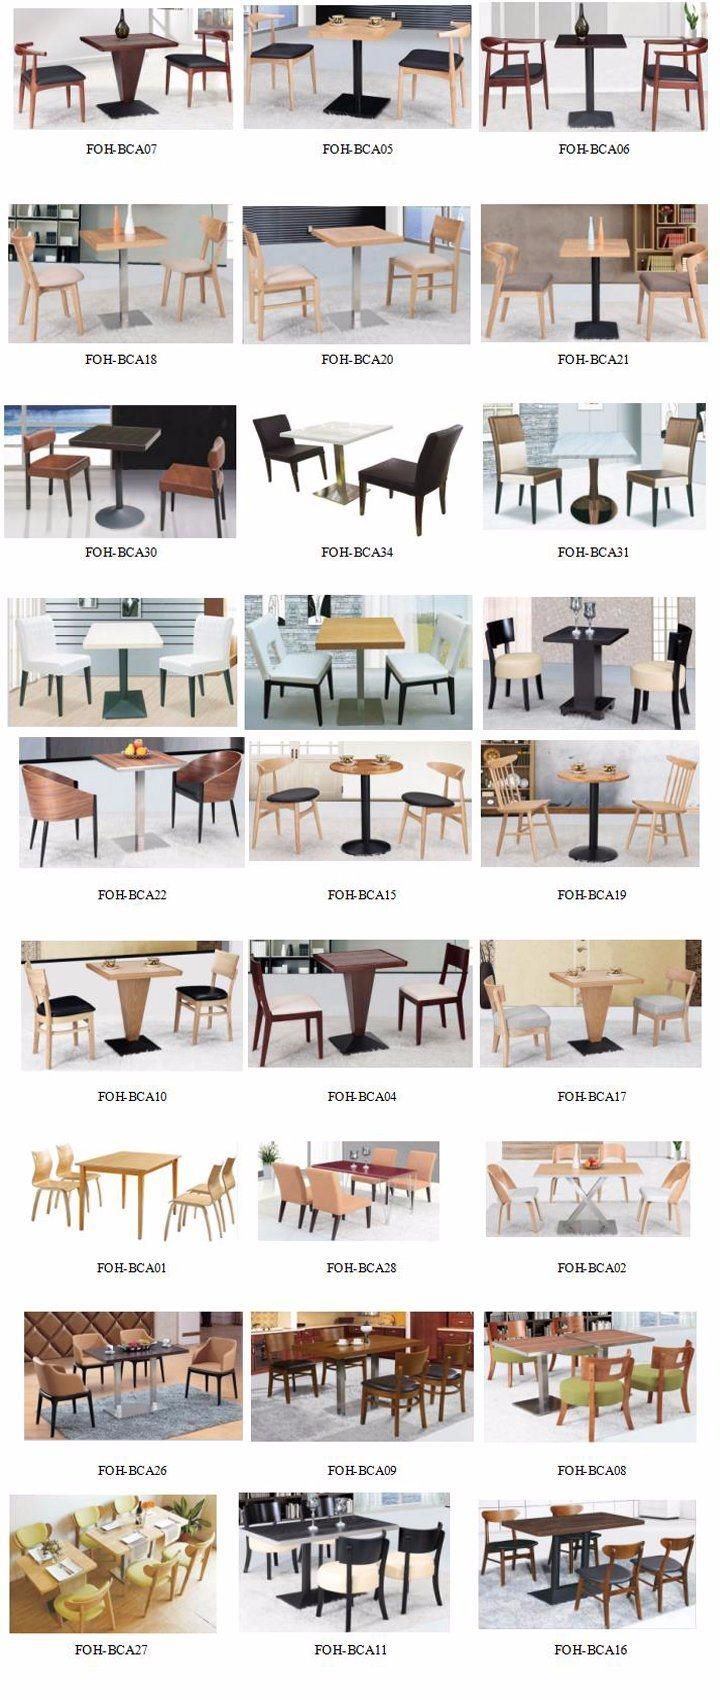 Chinese Factory Commercial Furniture Supplier for Restaurant Cafe Table Chair Booth Seating